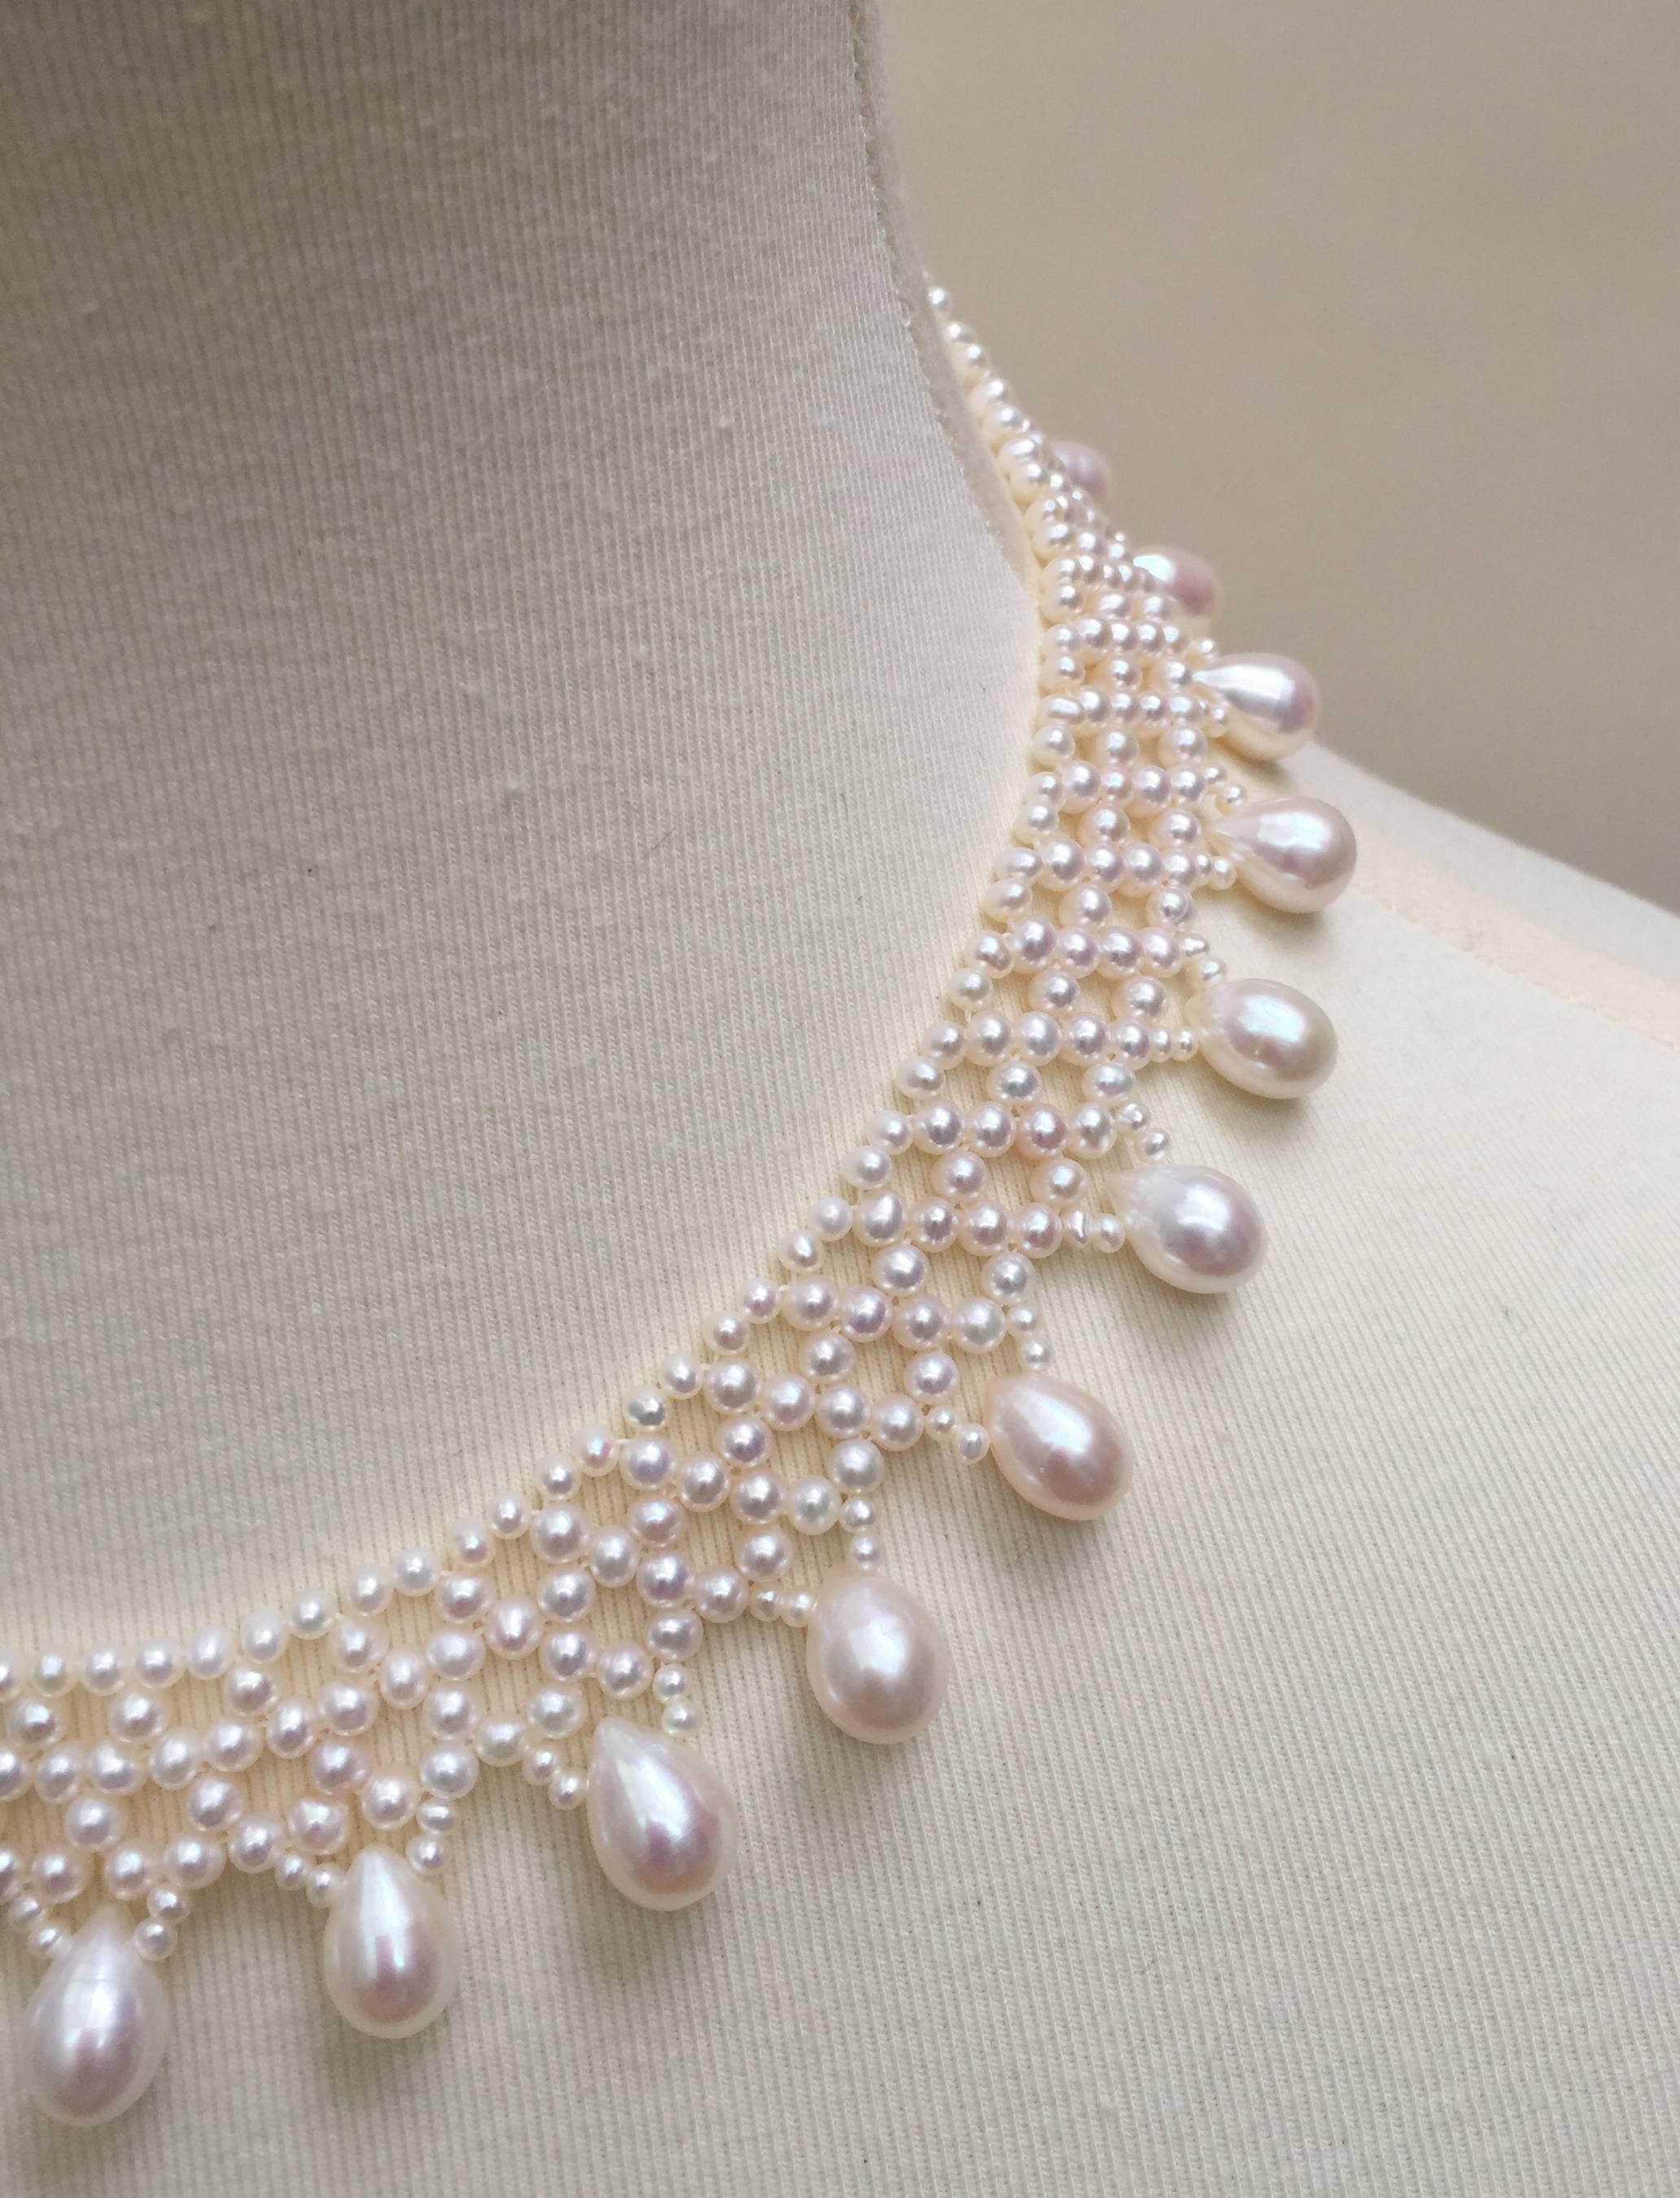 Bead   Marina J  Woven Pearl Necklace with Pear-Shaped Pearl Drops and sliding clasp For Sale